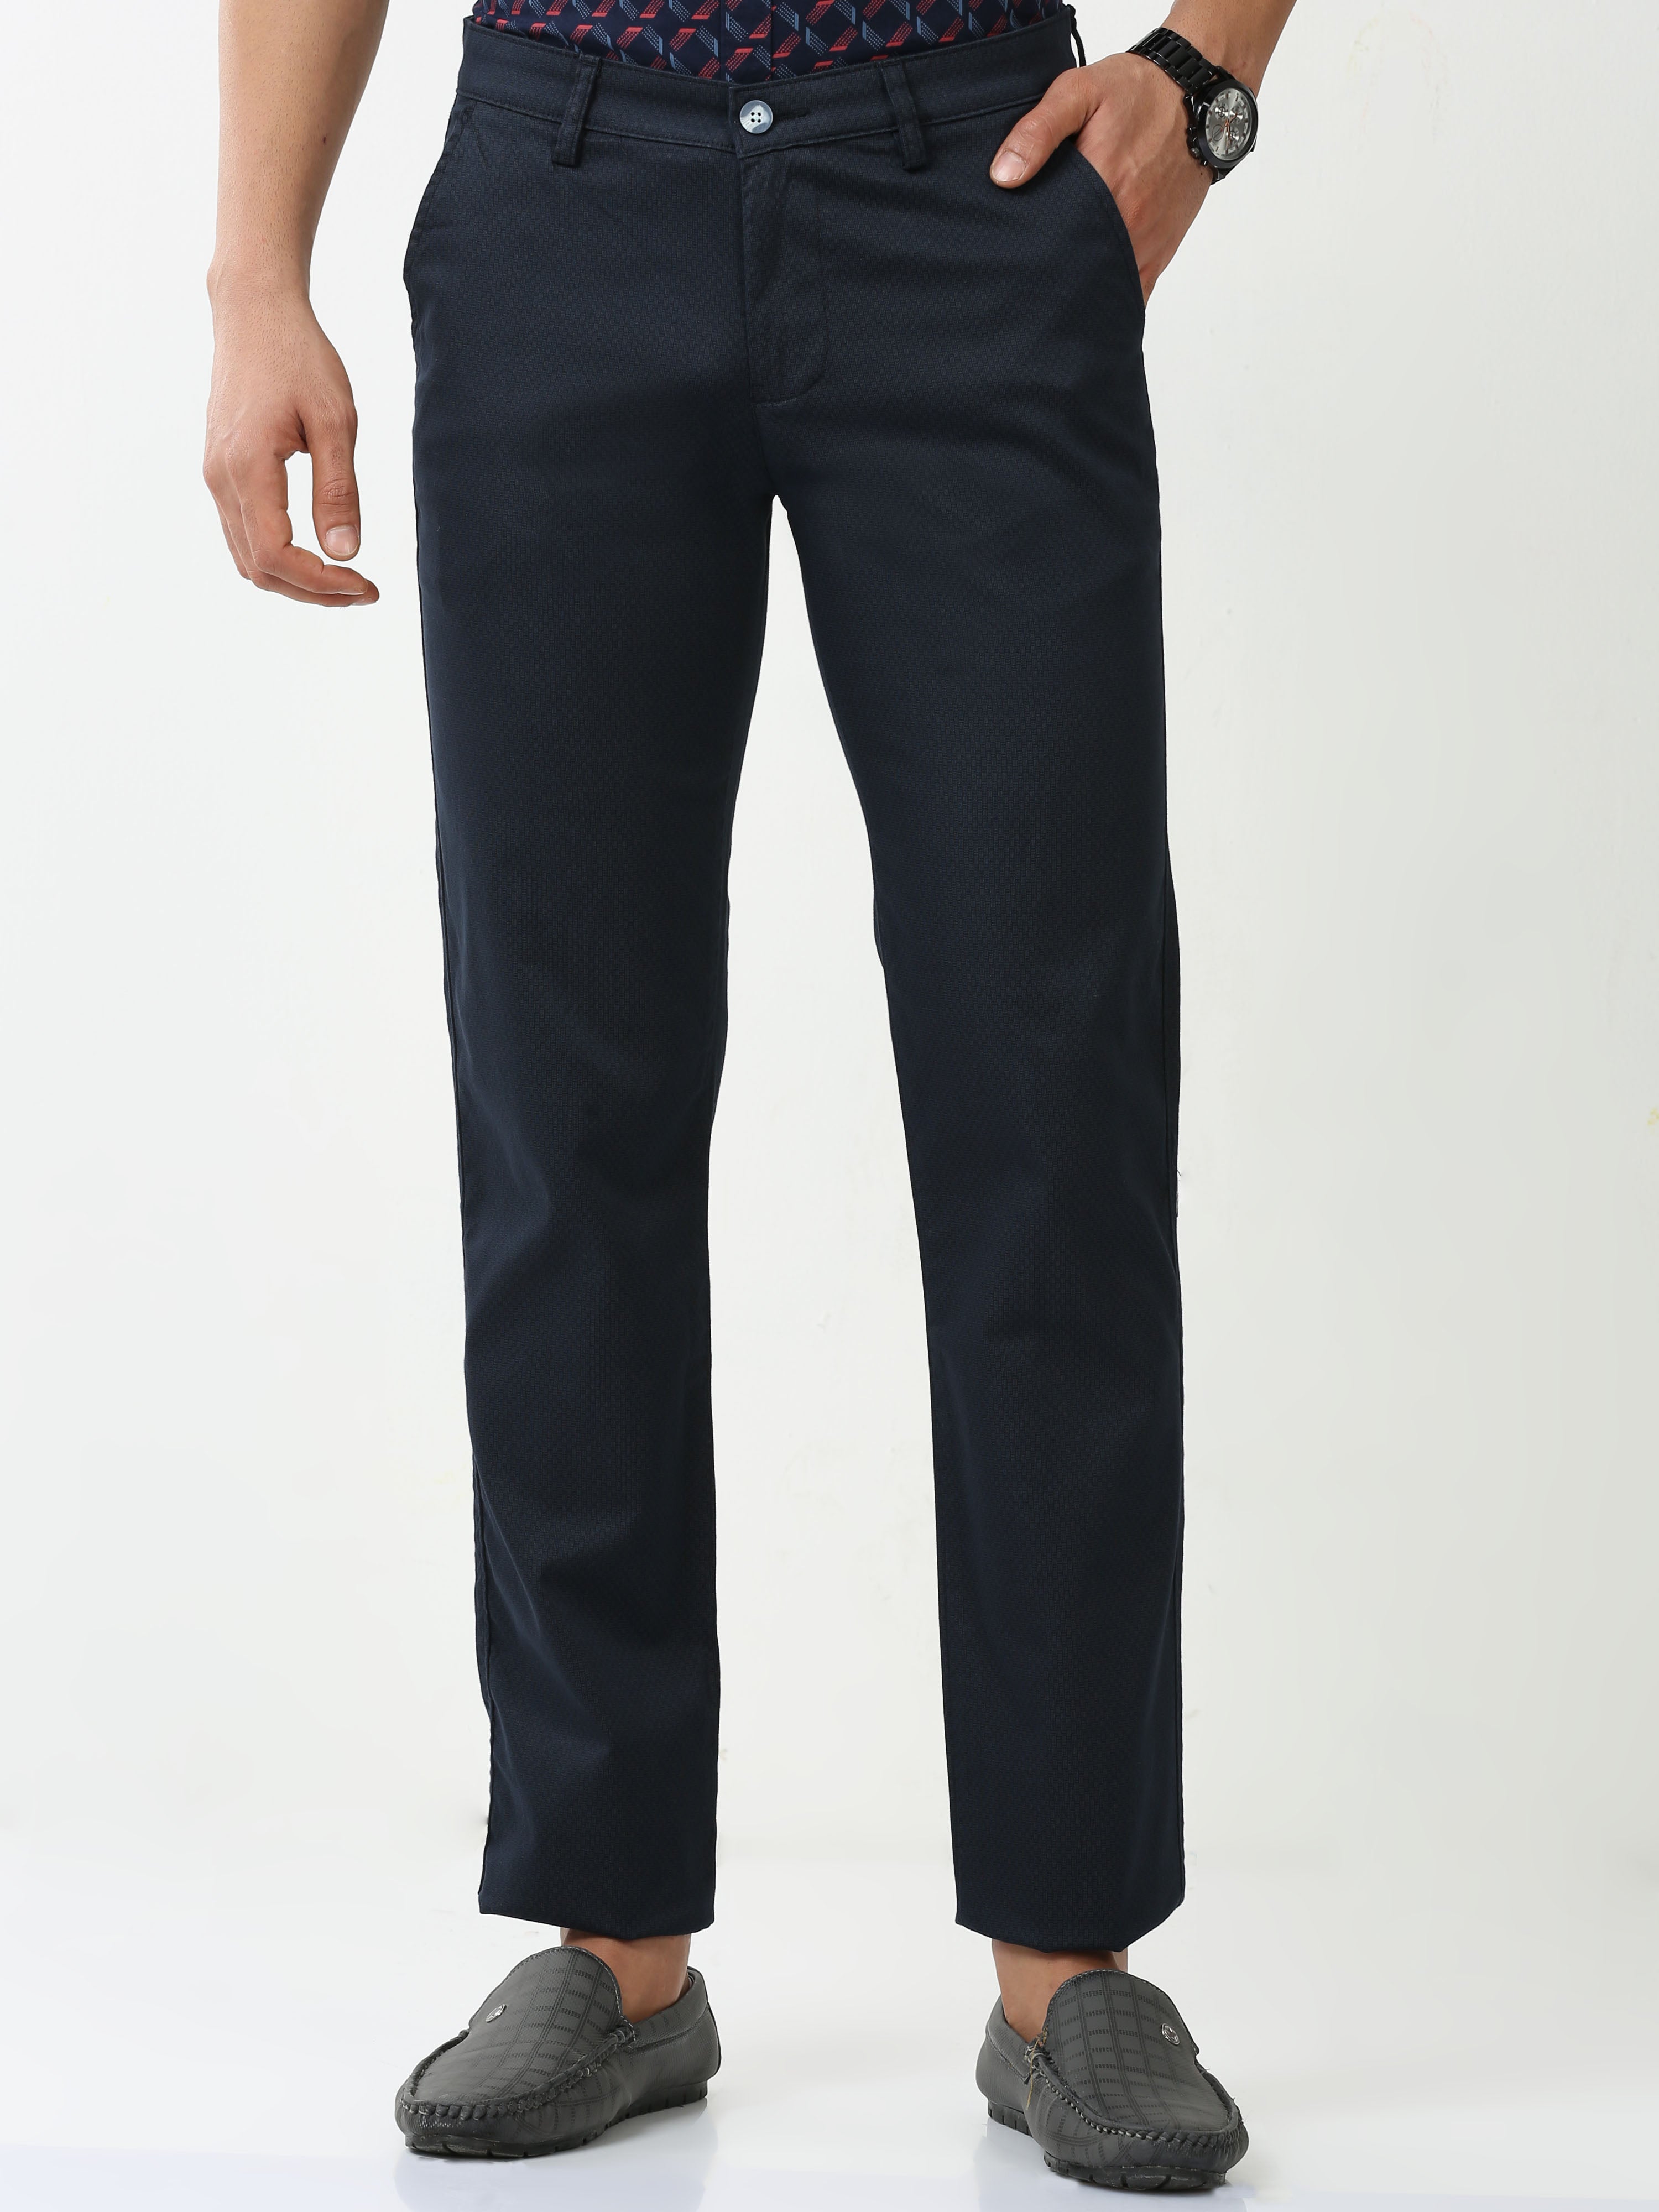 Classic Polo Mens Cotton Printed Chiesel Fit Navy Blue Color Trouser | TBO2-25 B-NVY-CF-LY